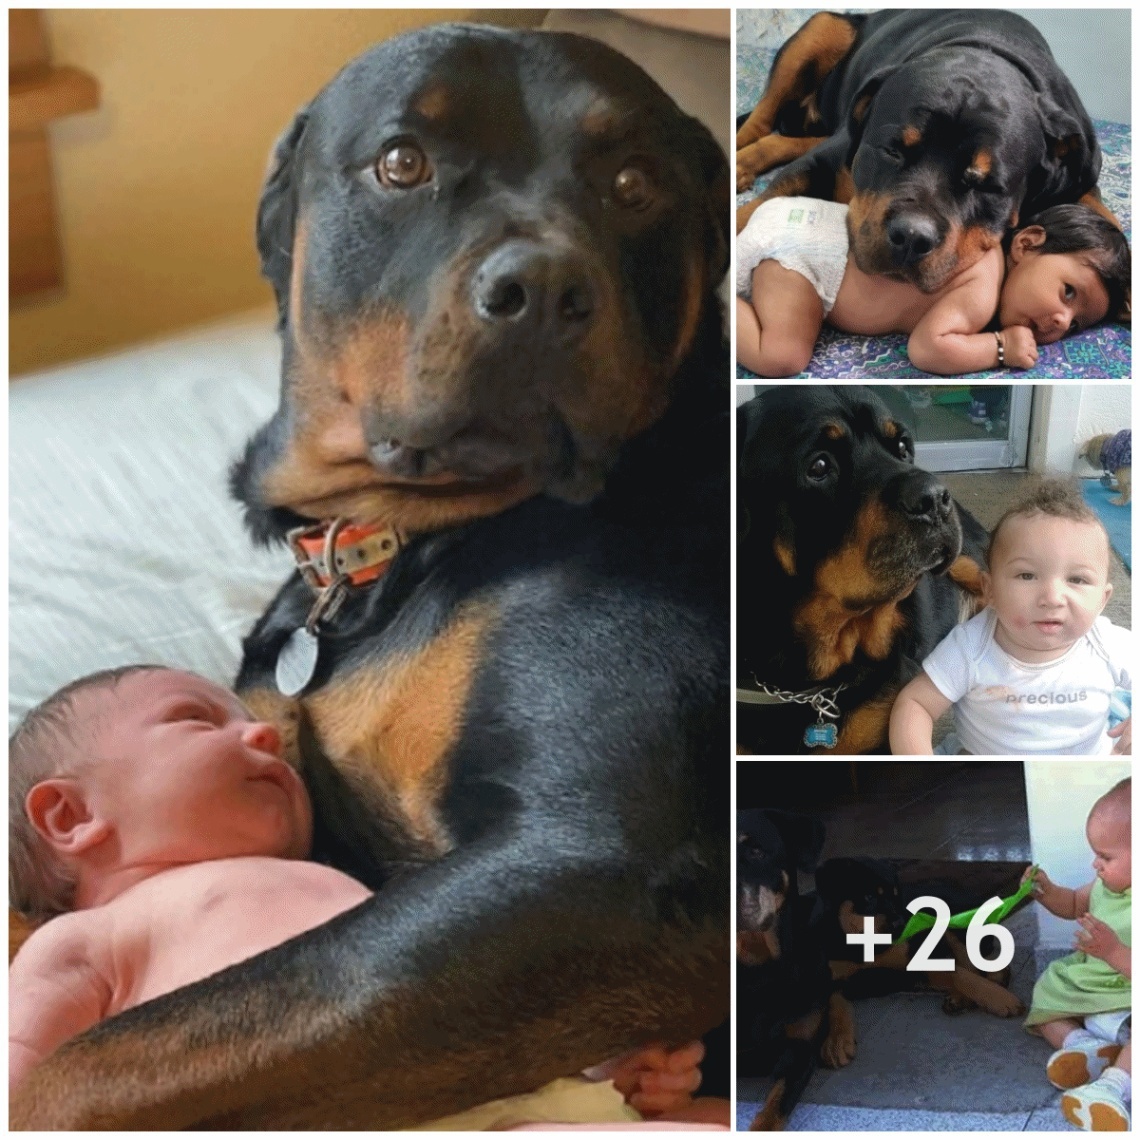 The Frozen Dog’s Heartwarming Connection with a Newborn Baby – An Unforgettable Moment of Love and Trust